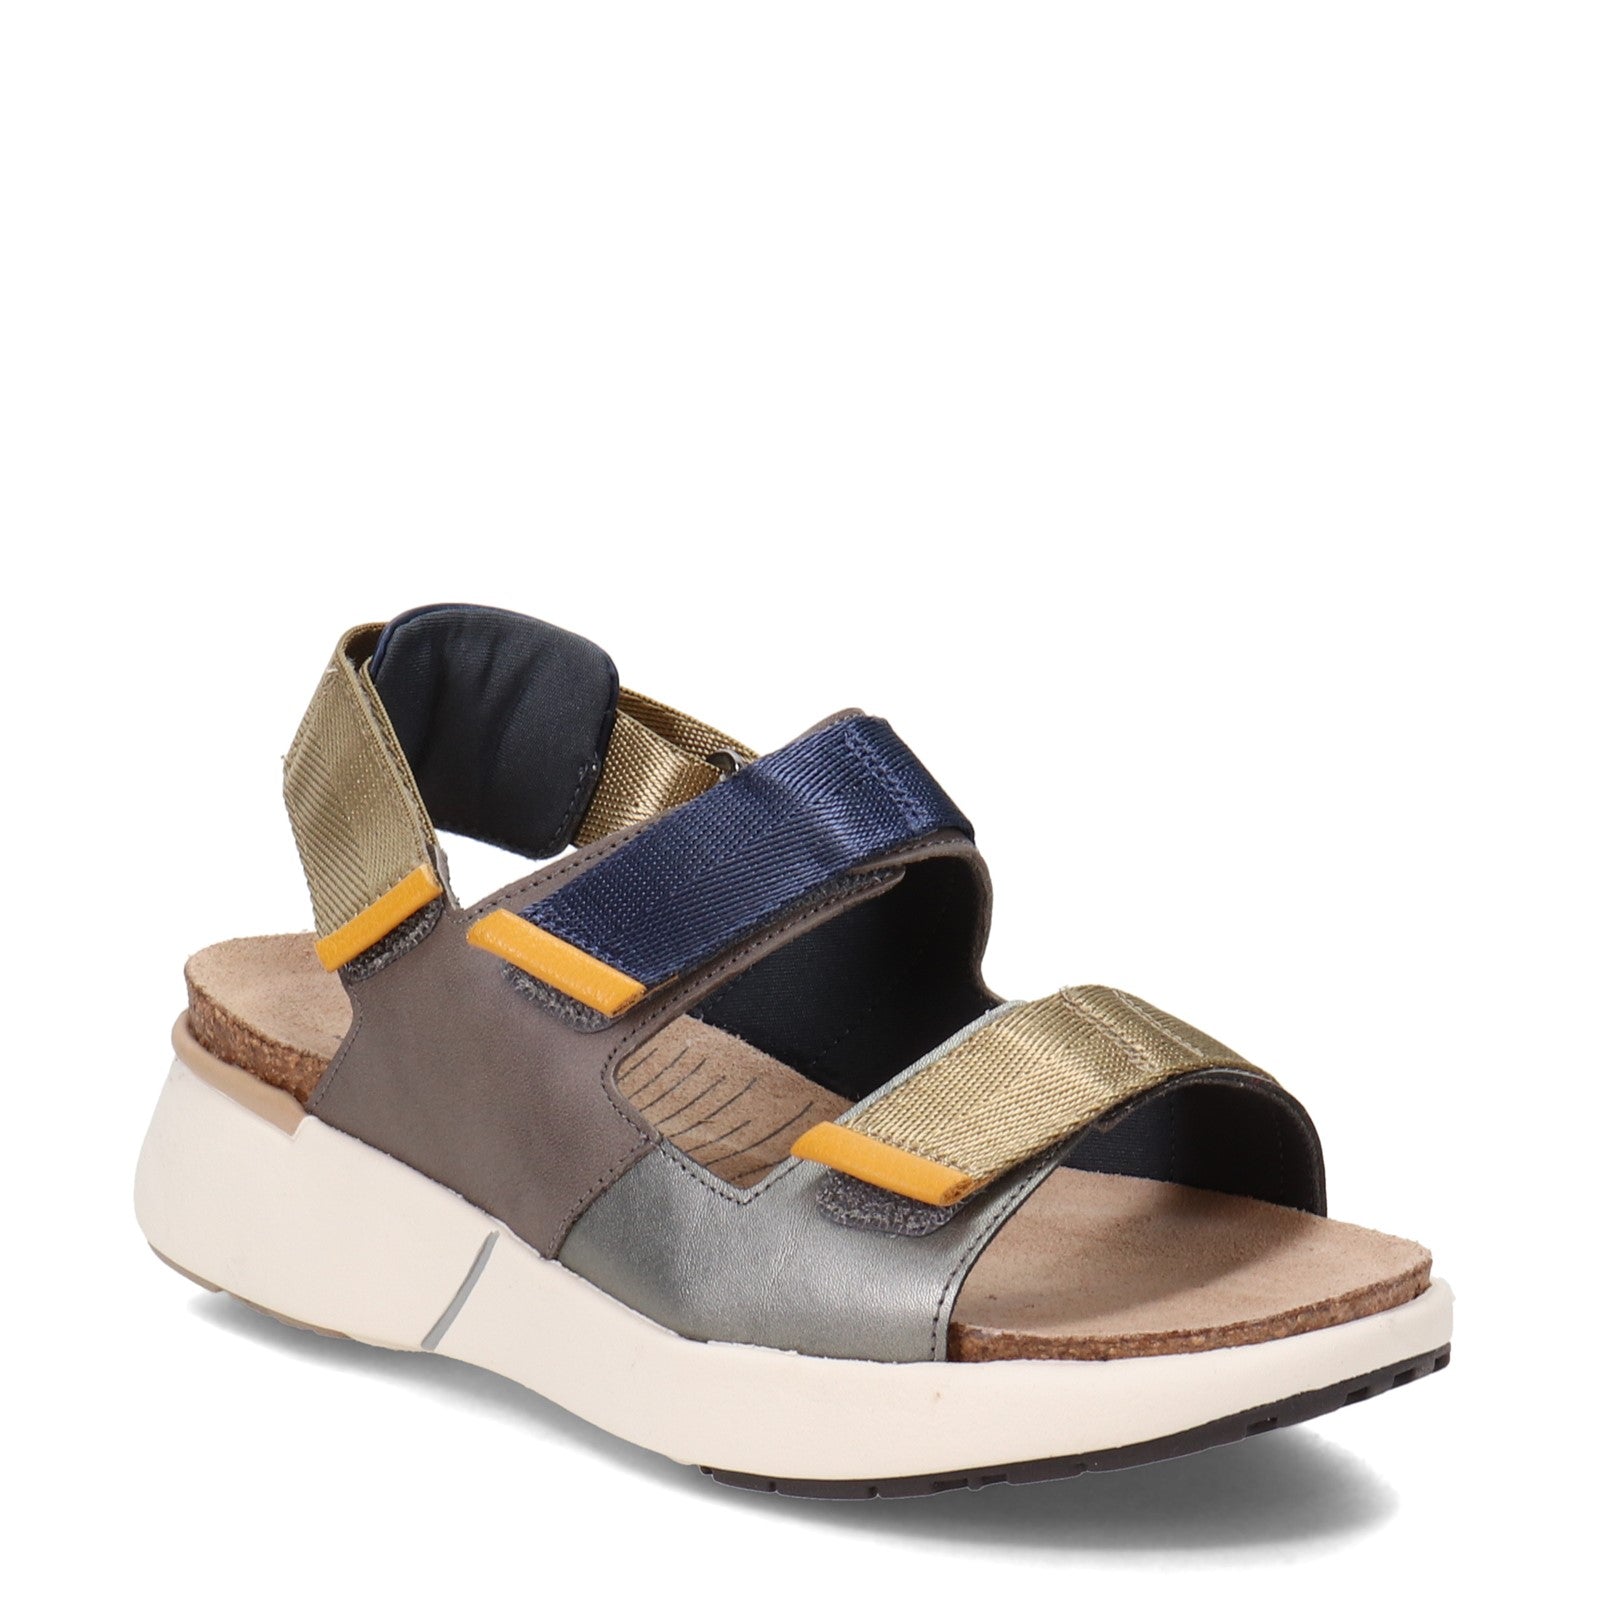 ODYSSEY SANDAL- GREY MULTI - Molly's! A Chic and Unique Boutique 